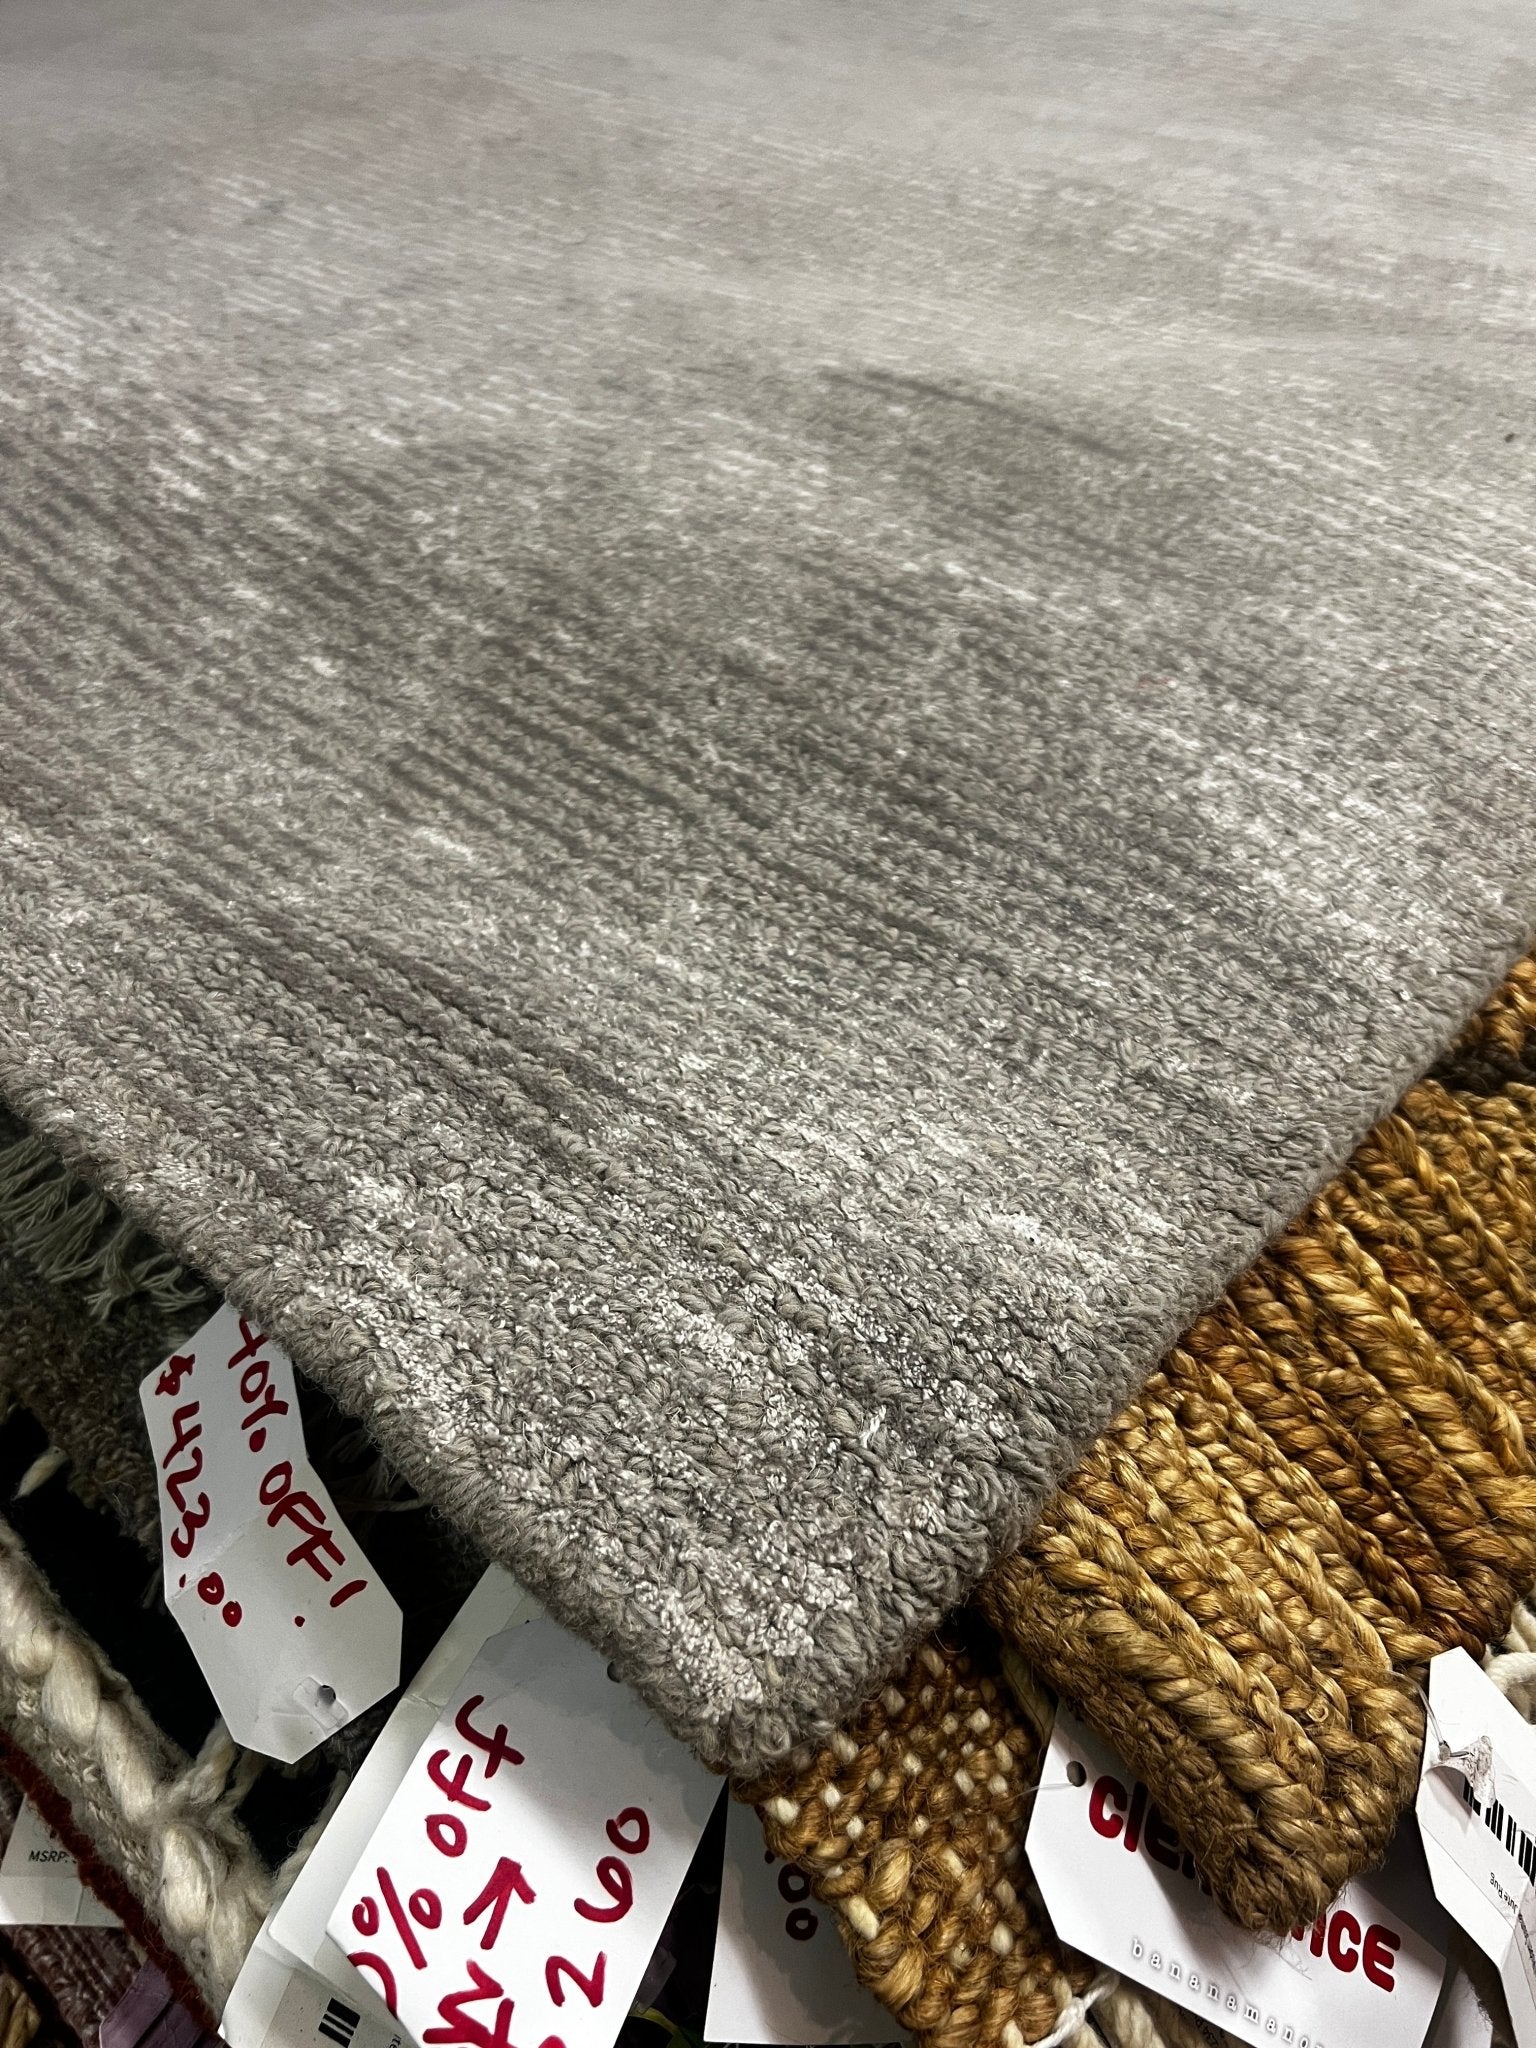 Gry Bay Grey Beige 5.3x7.6 Hand-Tufted Rug | Banana Manor Rug Factory Outlet